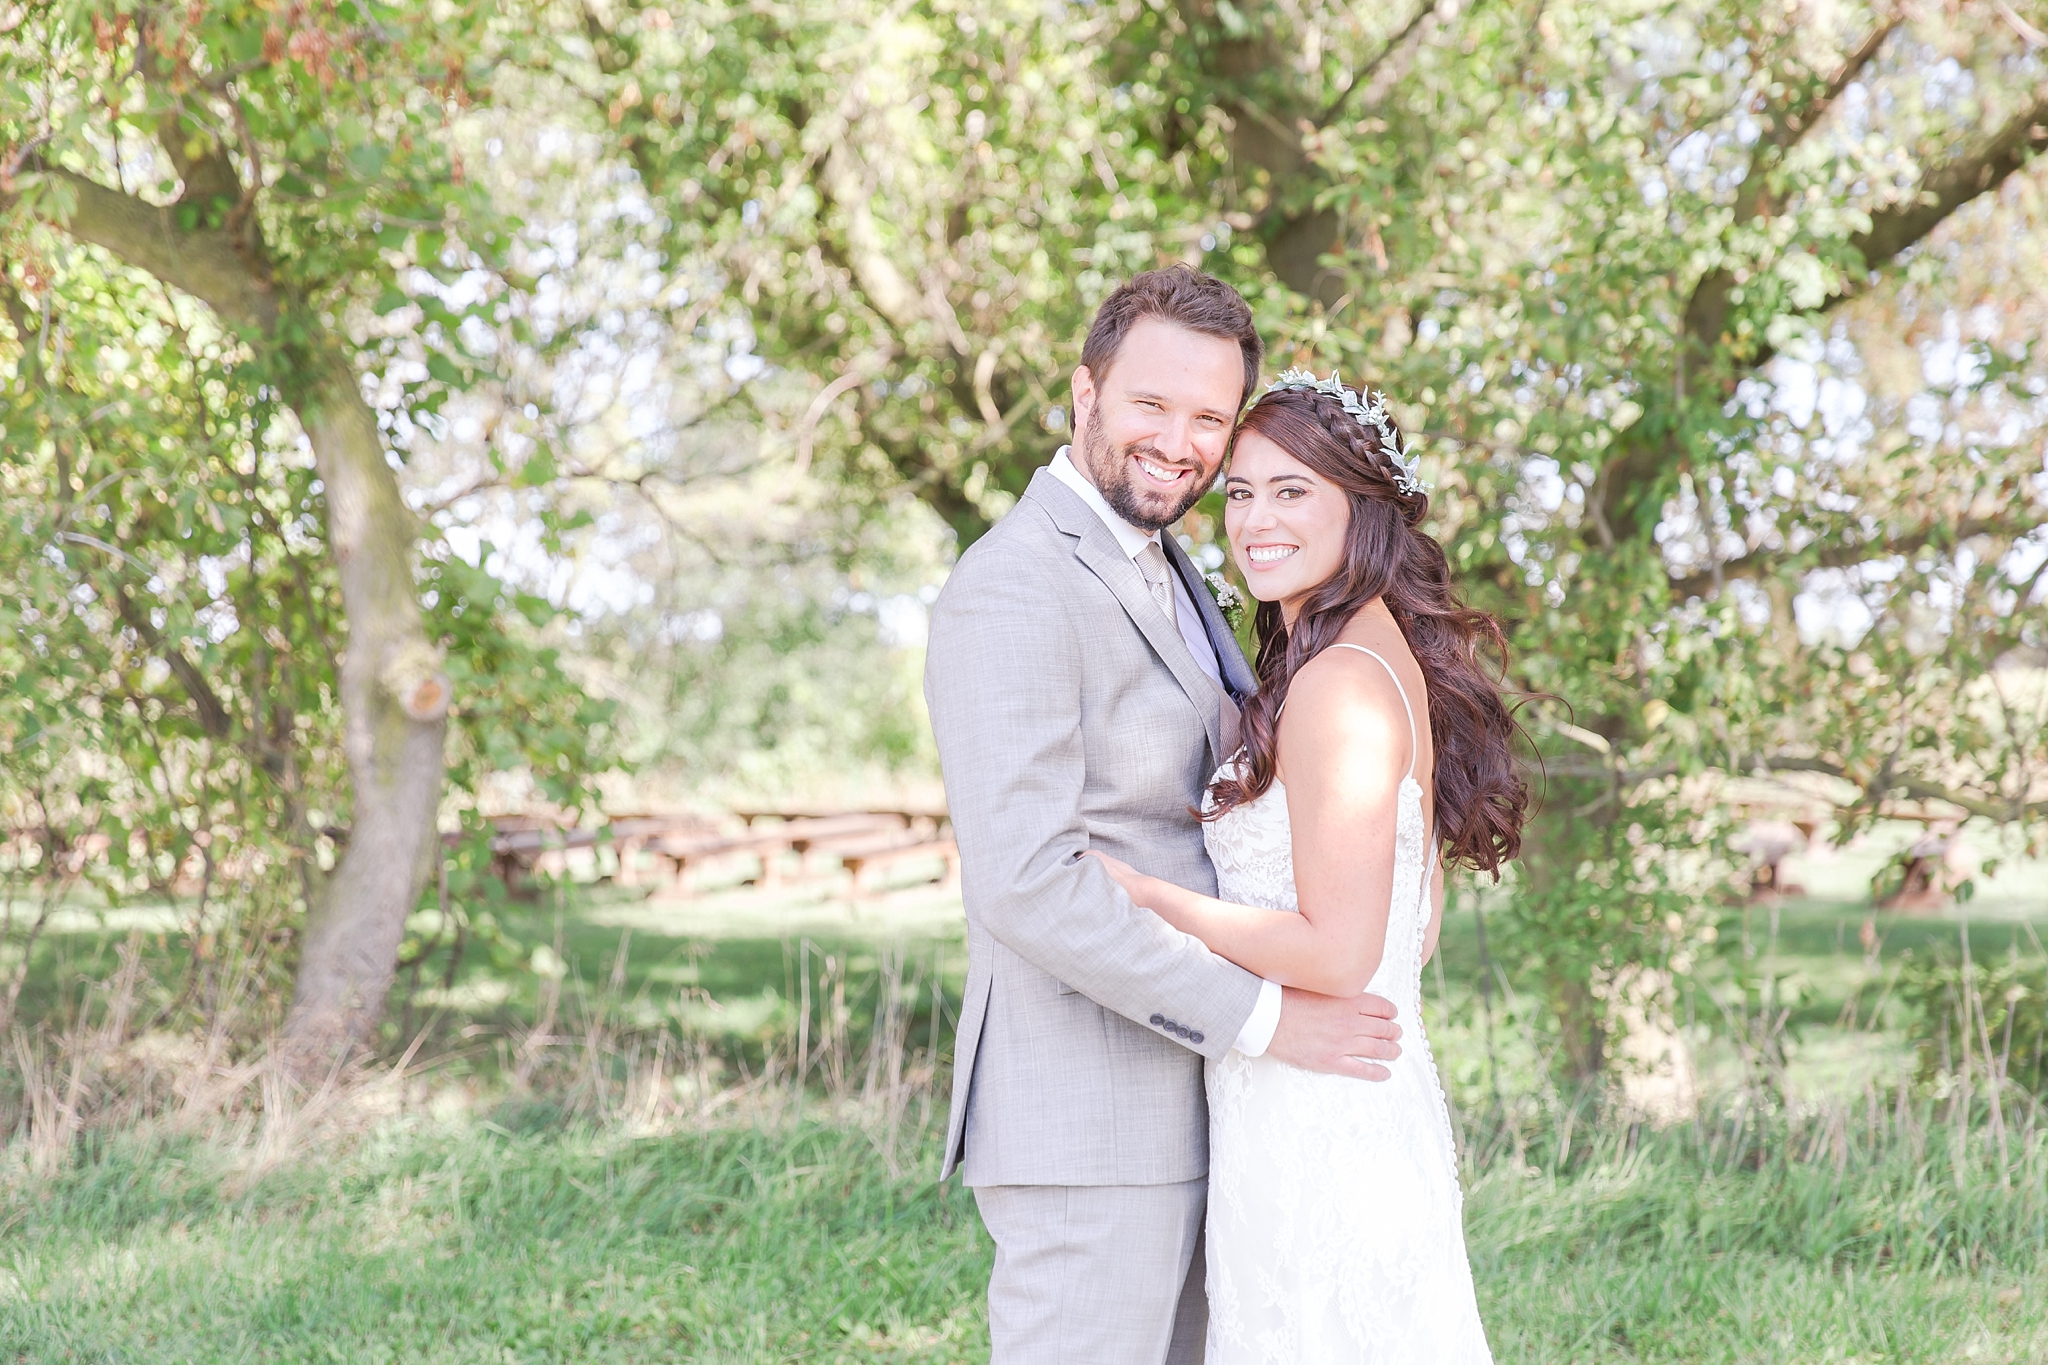 natural-rustic-wedding-photos-at-frutig-farms-the-valley-in-ann-arbor-michigan-by-courtney-carolyn-photography_0022.jpg